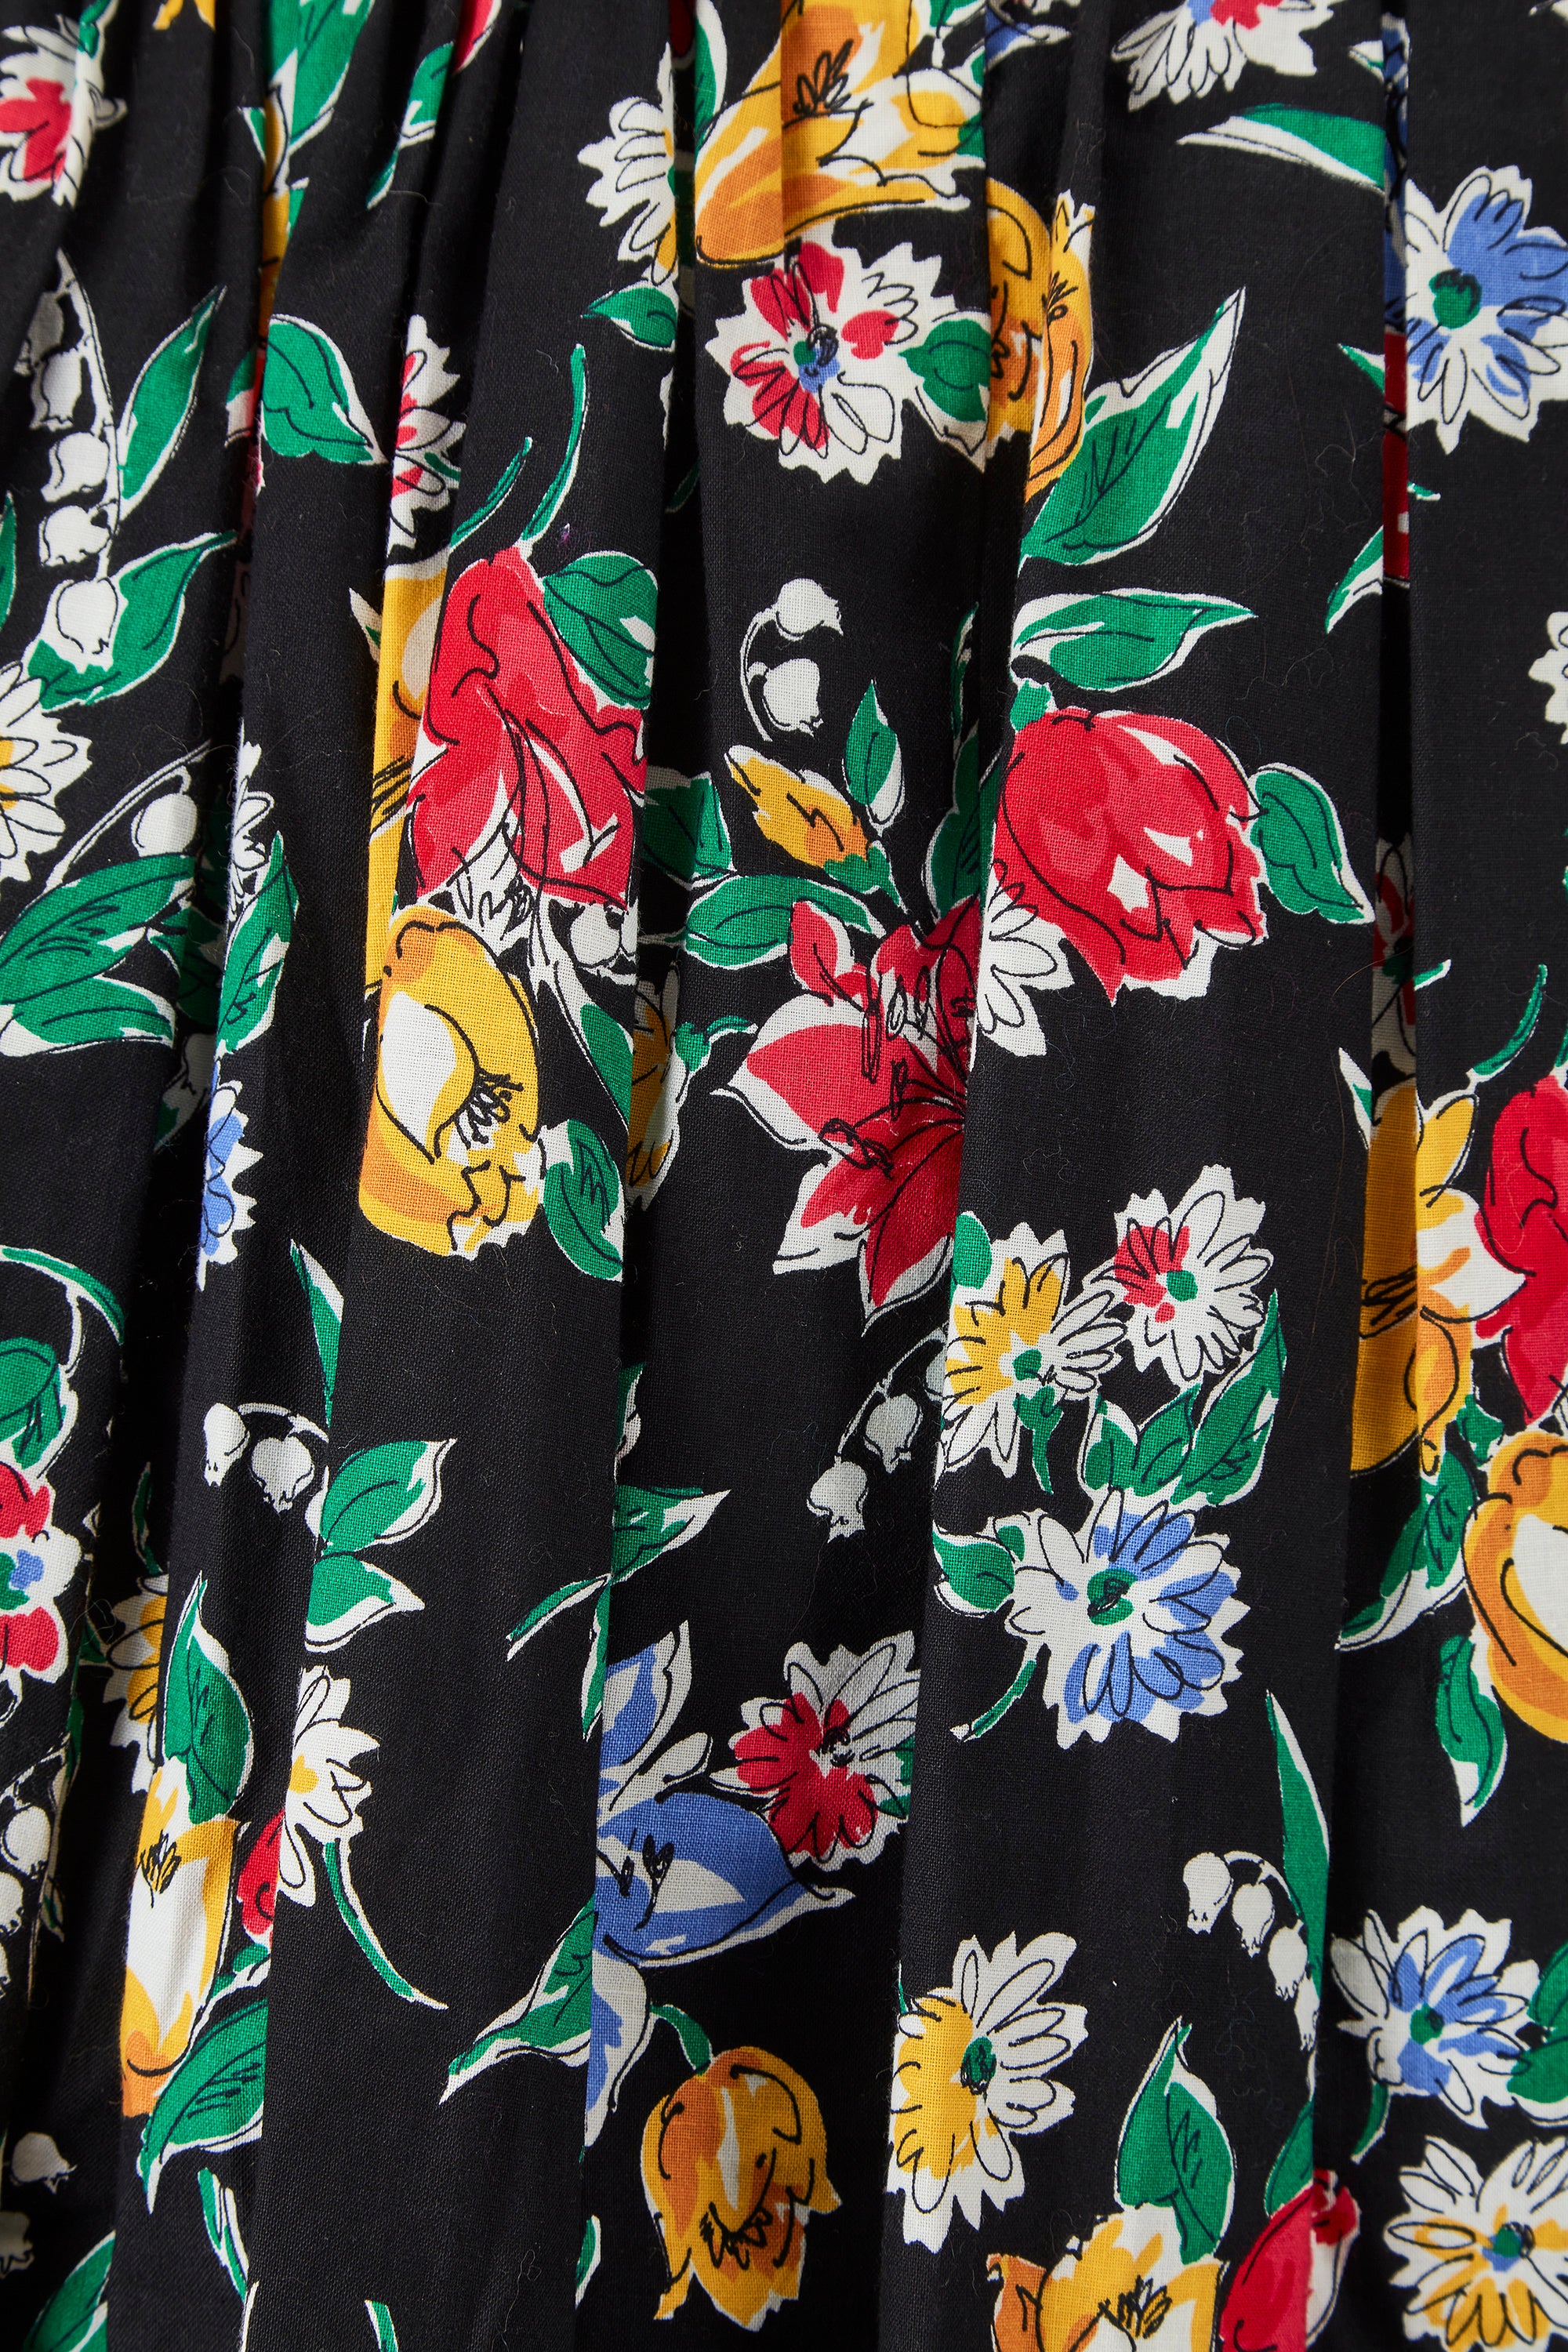 1980s Victor Costa Black and Floral Print Cotton Dress